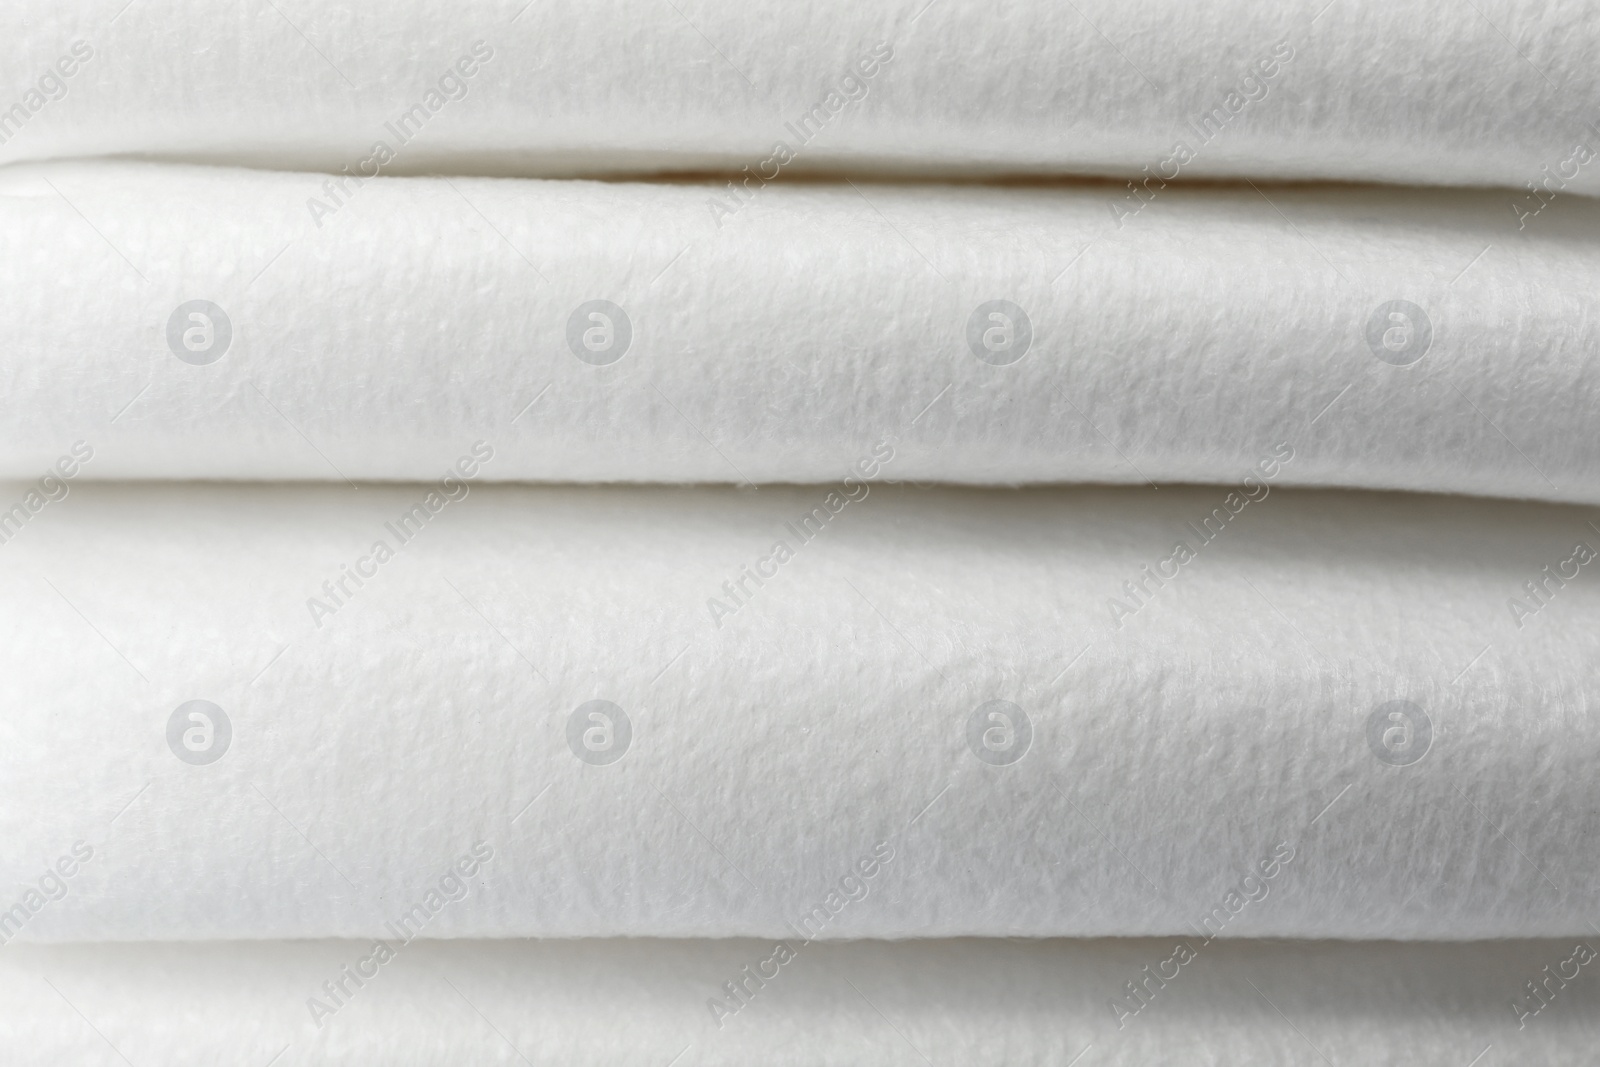 Photo of Stack of baby diapers as background, closeup